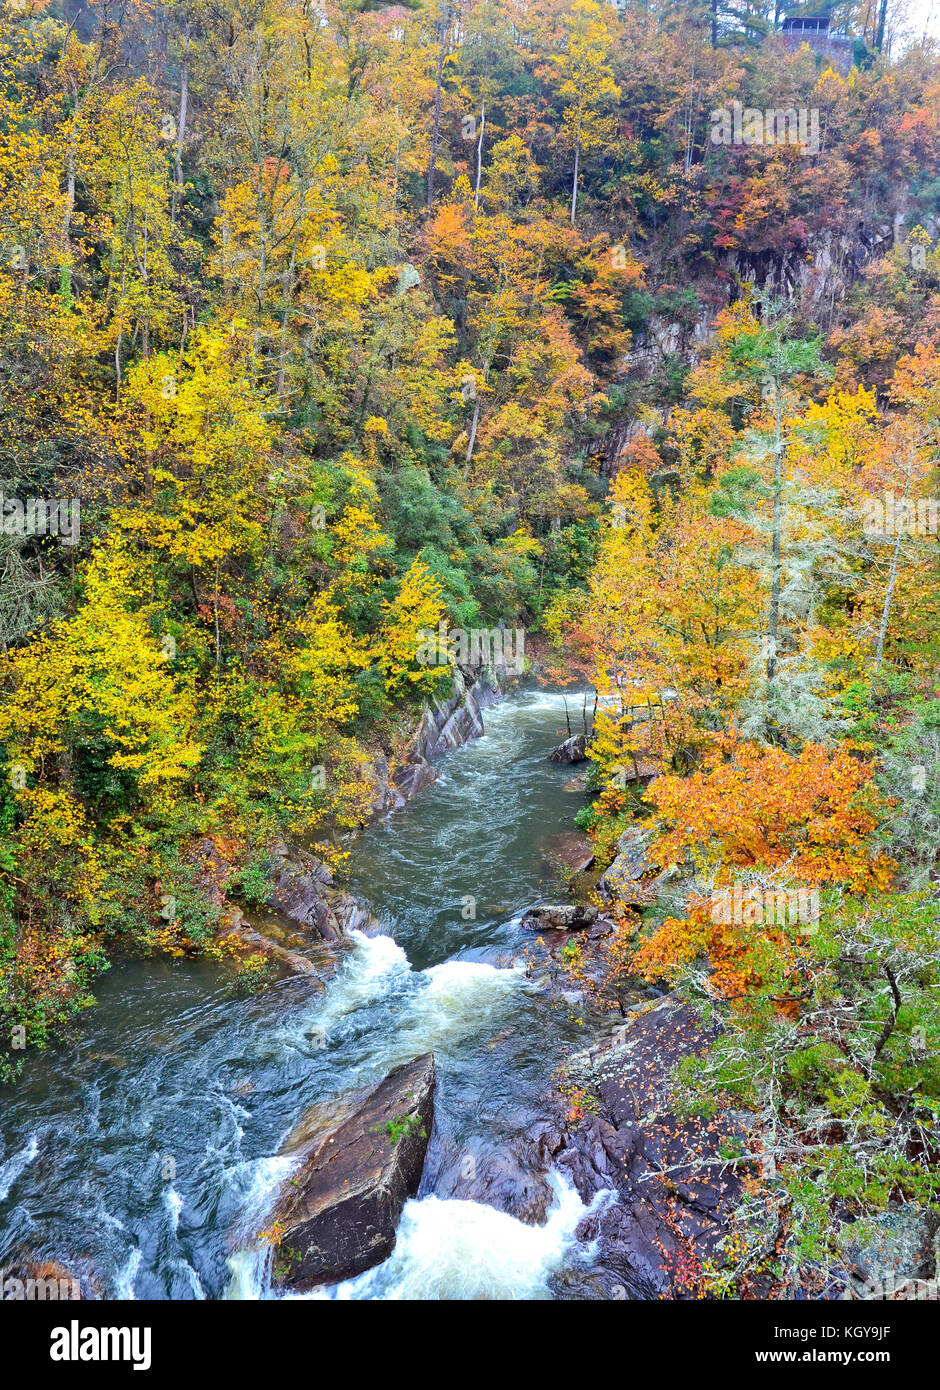 Tallulah River Gorge in the Fall Stock Photo